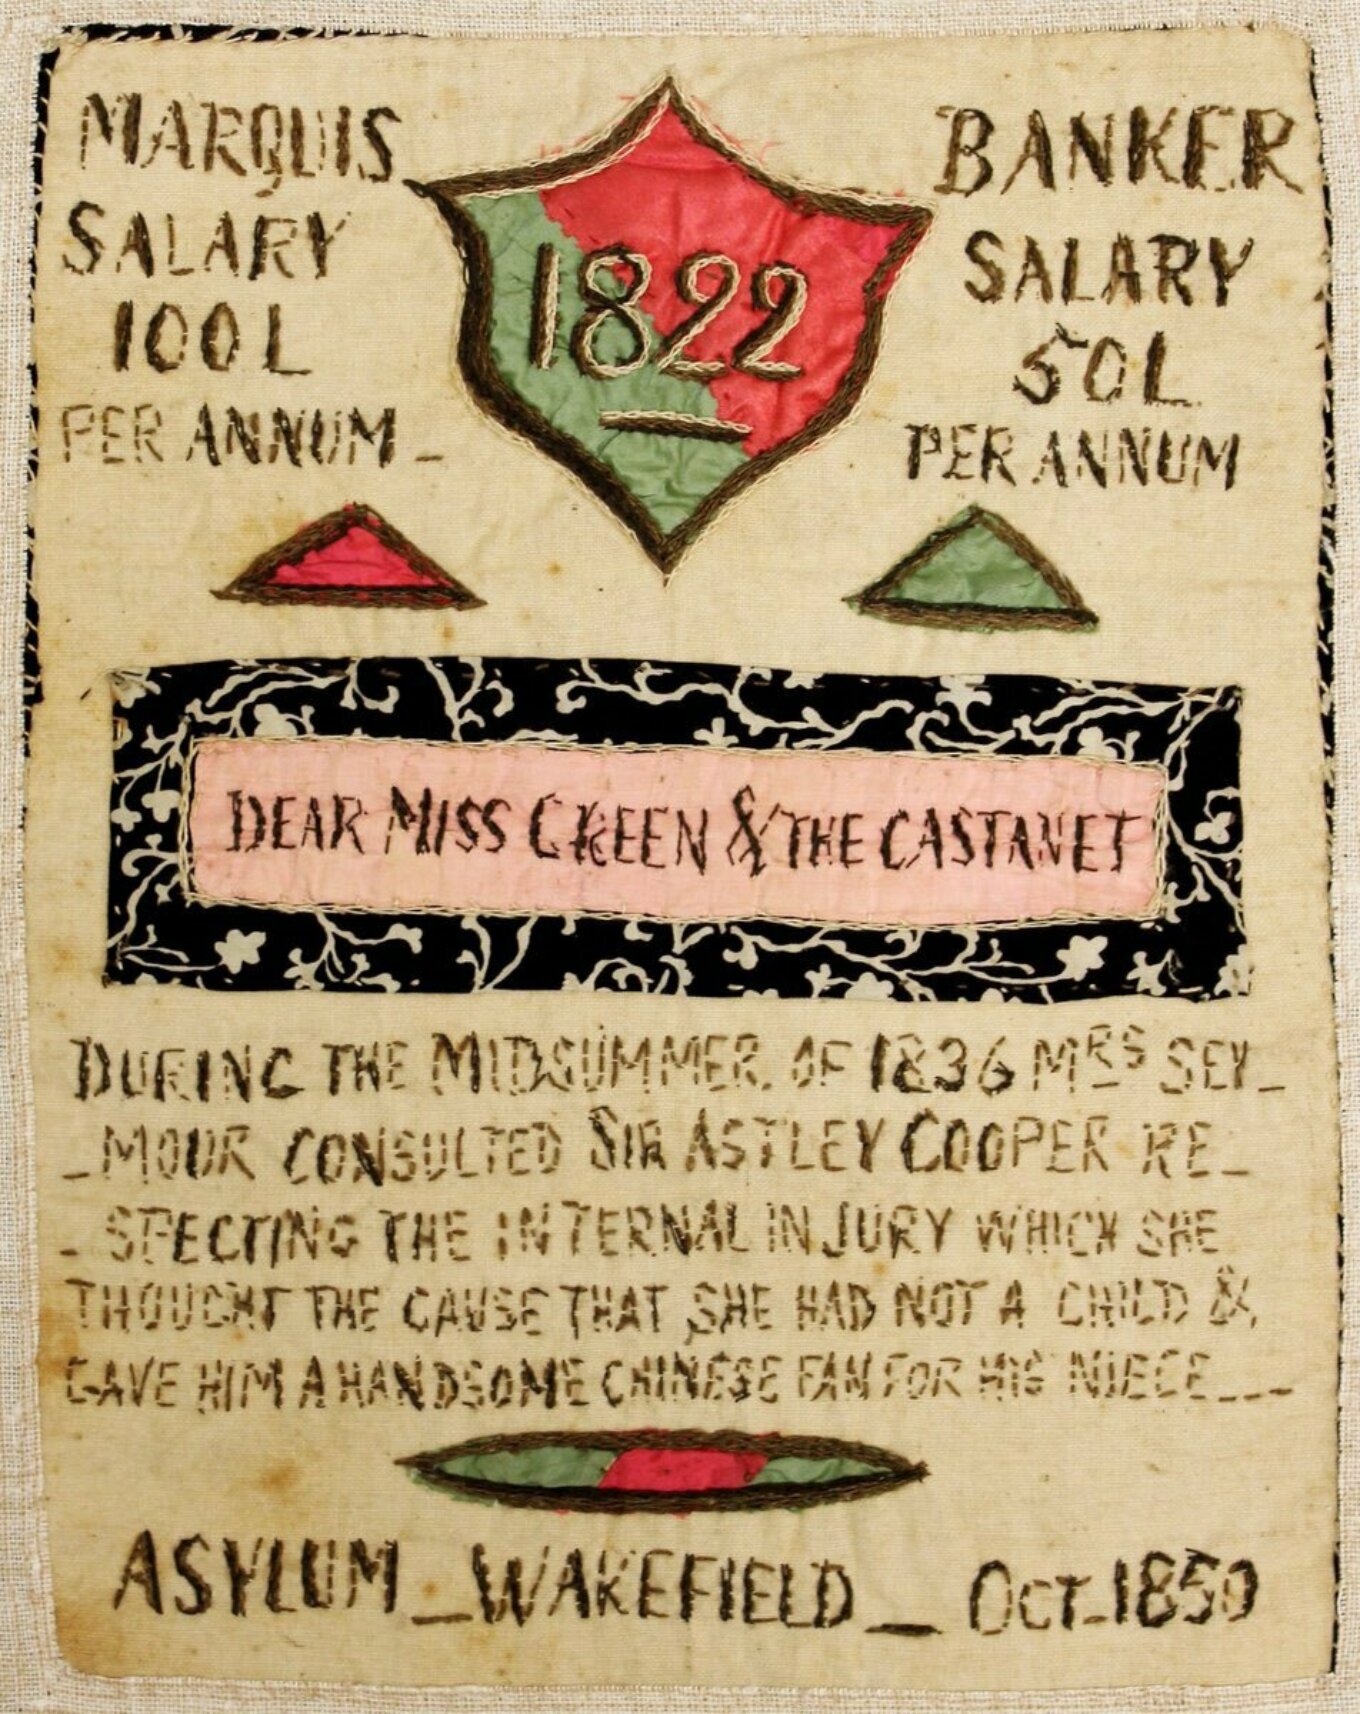 A green and red shield stitched onto cream cloth, bearing the date ‘1822’. On either side of it, stitched text reads ‘Marquis salary – 100£ per annum’ and ‘Banker salary – 50£ per annum’. In a pink strip of fabric beneath is the salutation ‘Dear Miss Green & the Castanet’. Below this, text reads: ‘During the midsummer of 1836 Mrs Seymour consulted Sir Astley Cooper respecting the internal injury which she thought the cause that she had not a child & gave him a handsome Chinese fan for her niece. Asylum, Wakefield, 1850.’